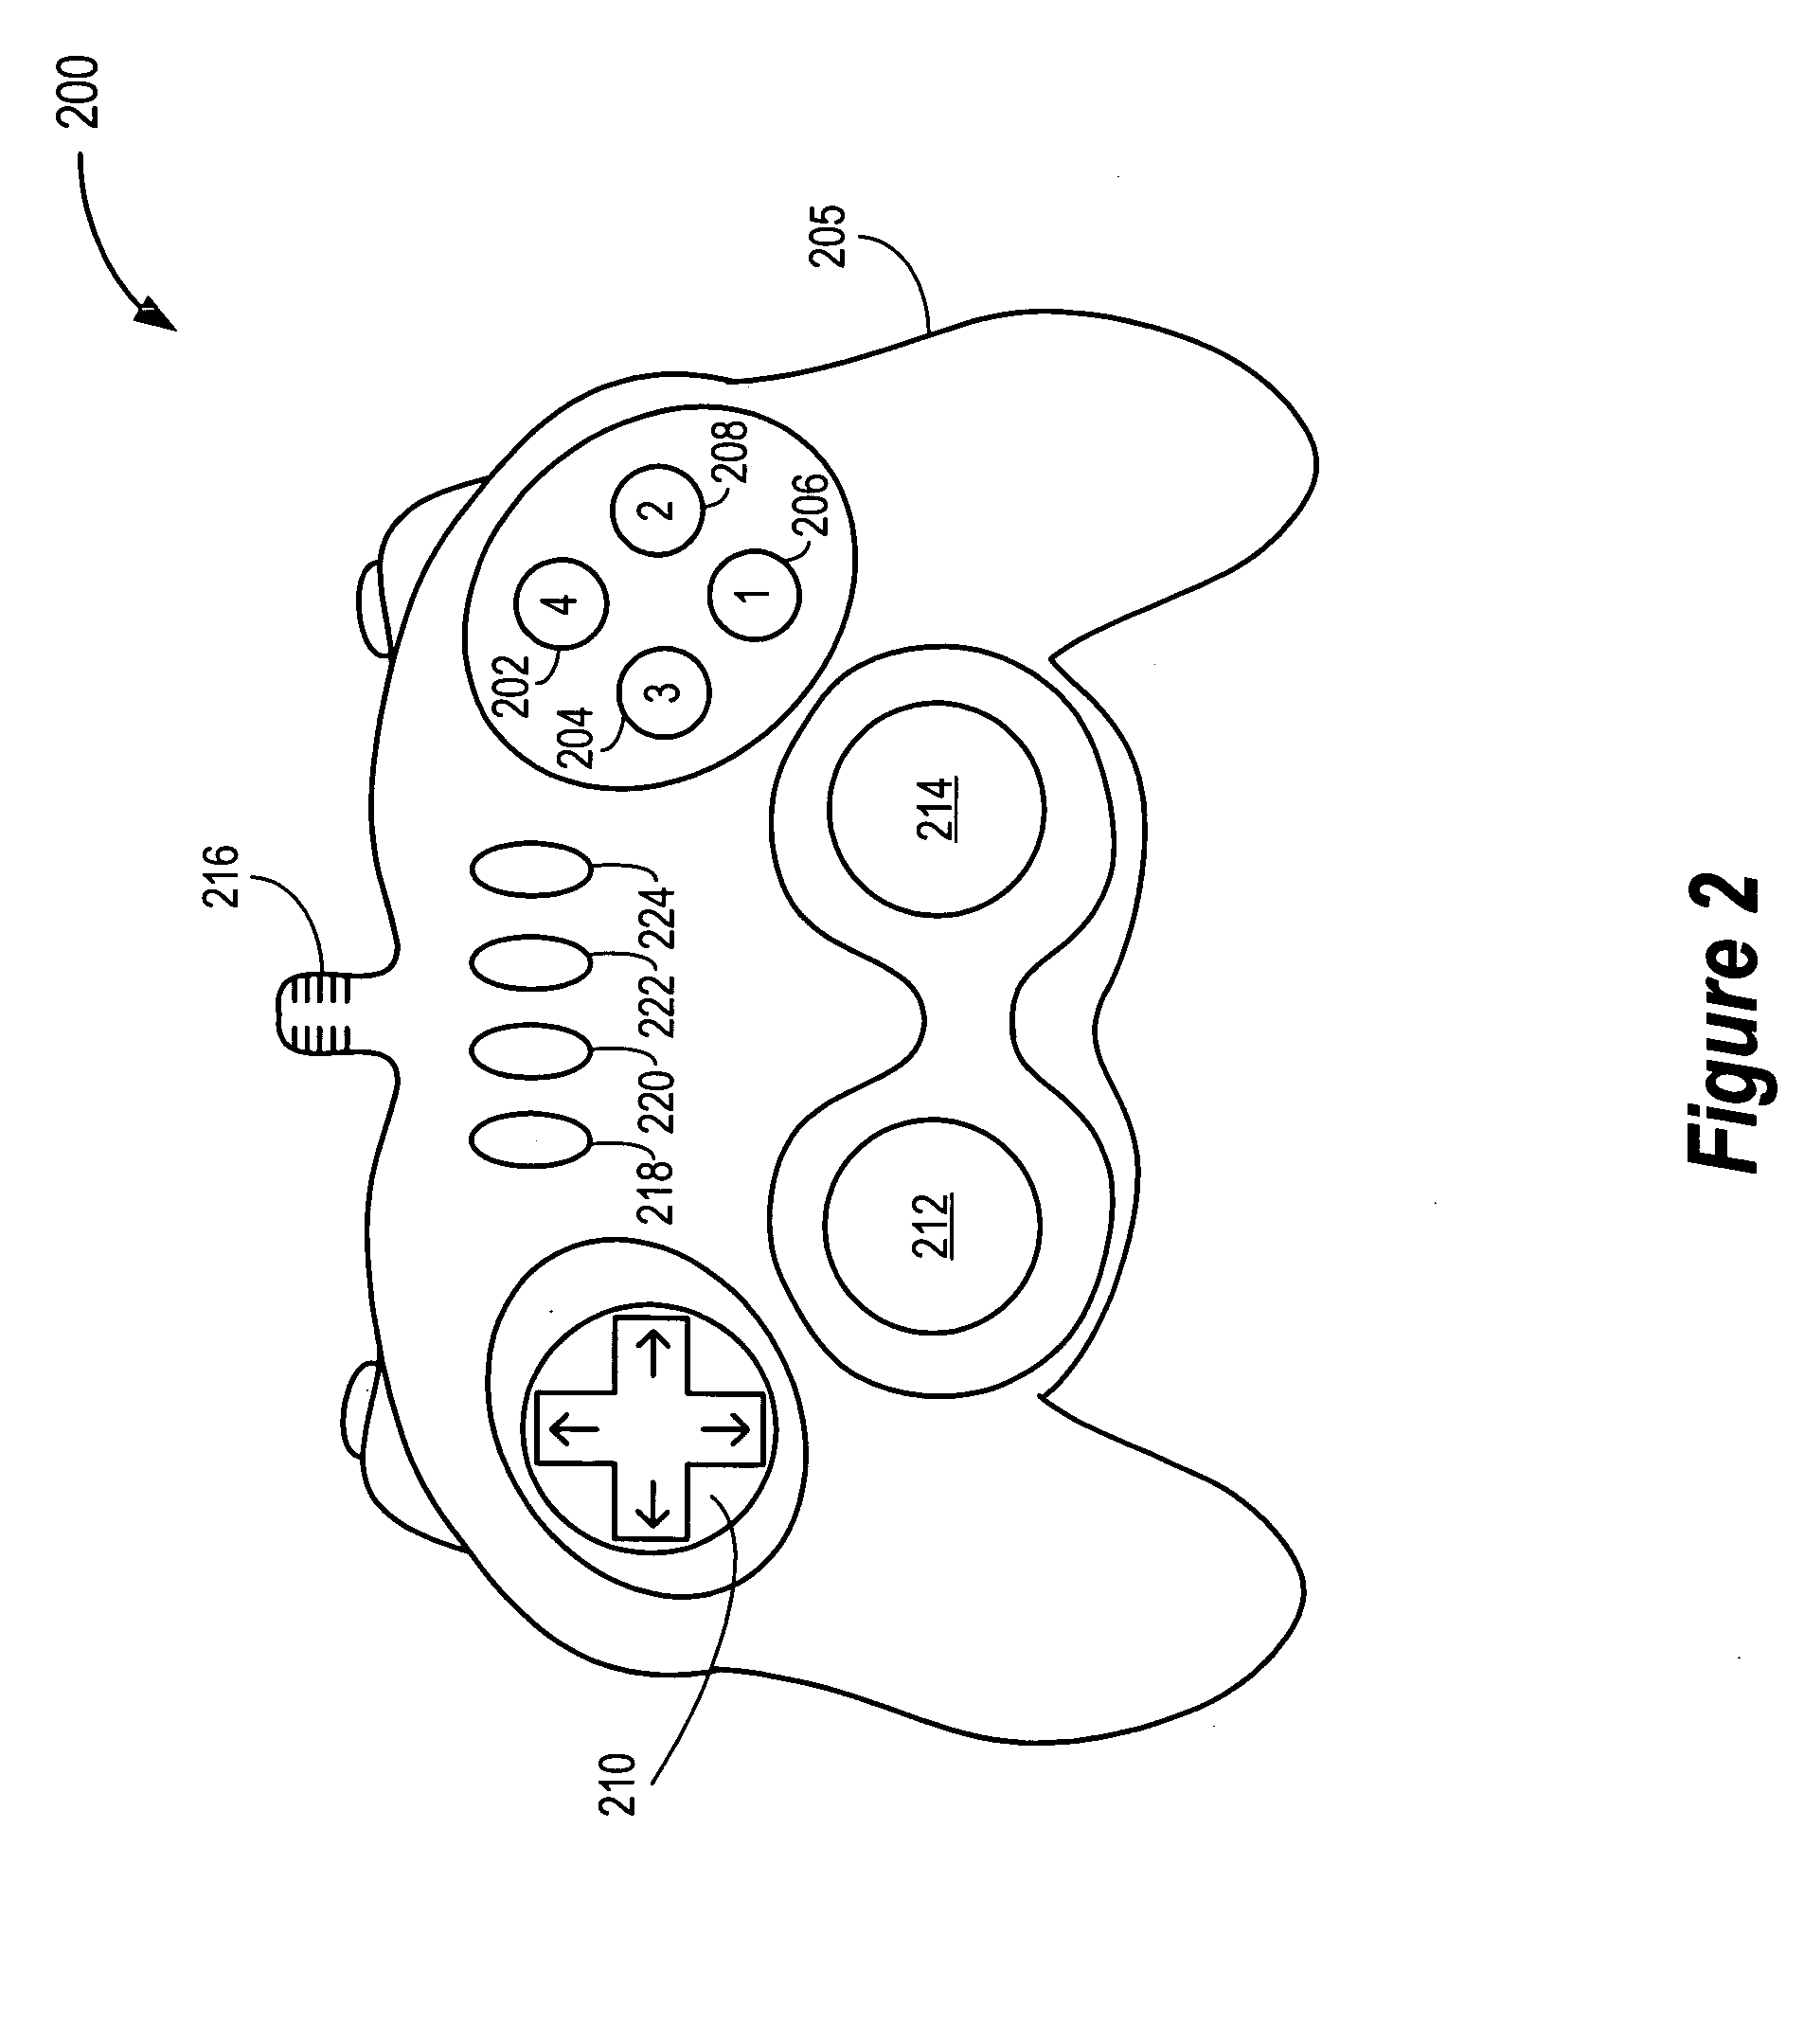 Method of indicating the ordinal number of a player in a wireless gaming system